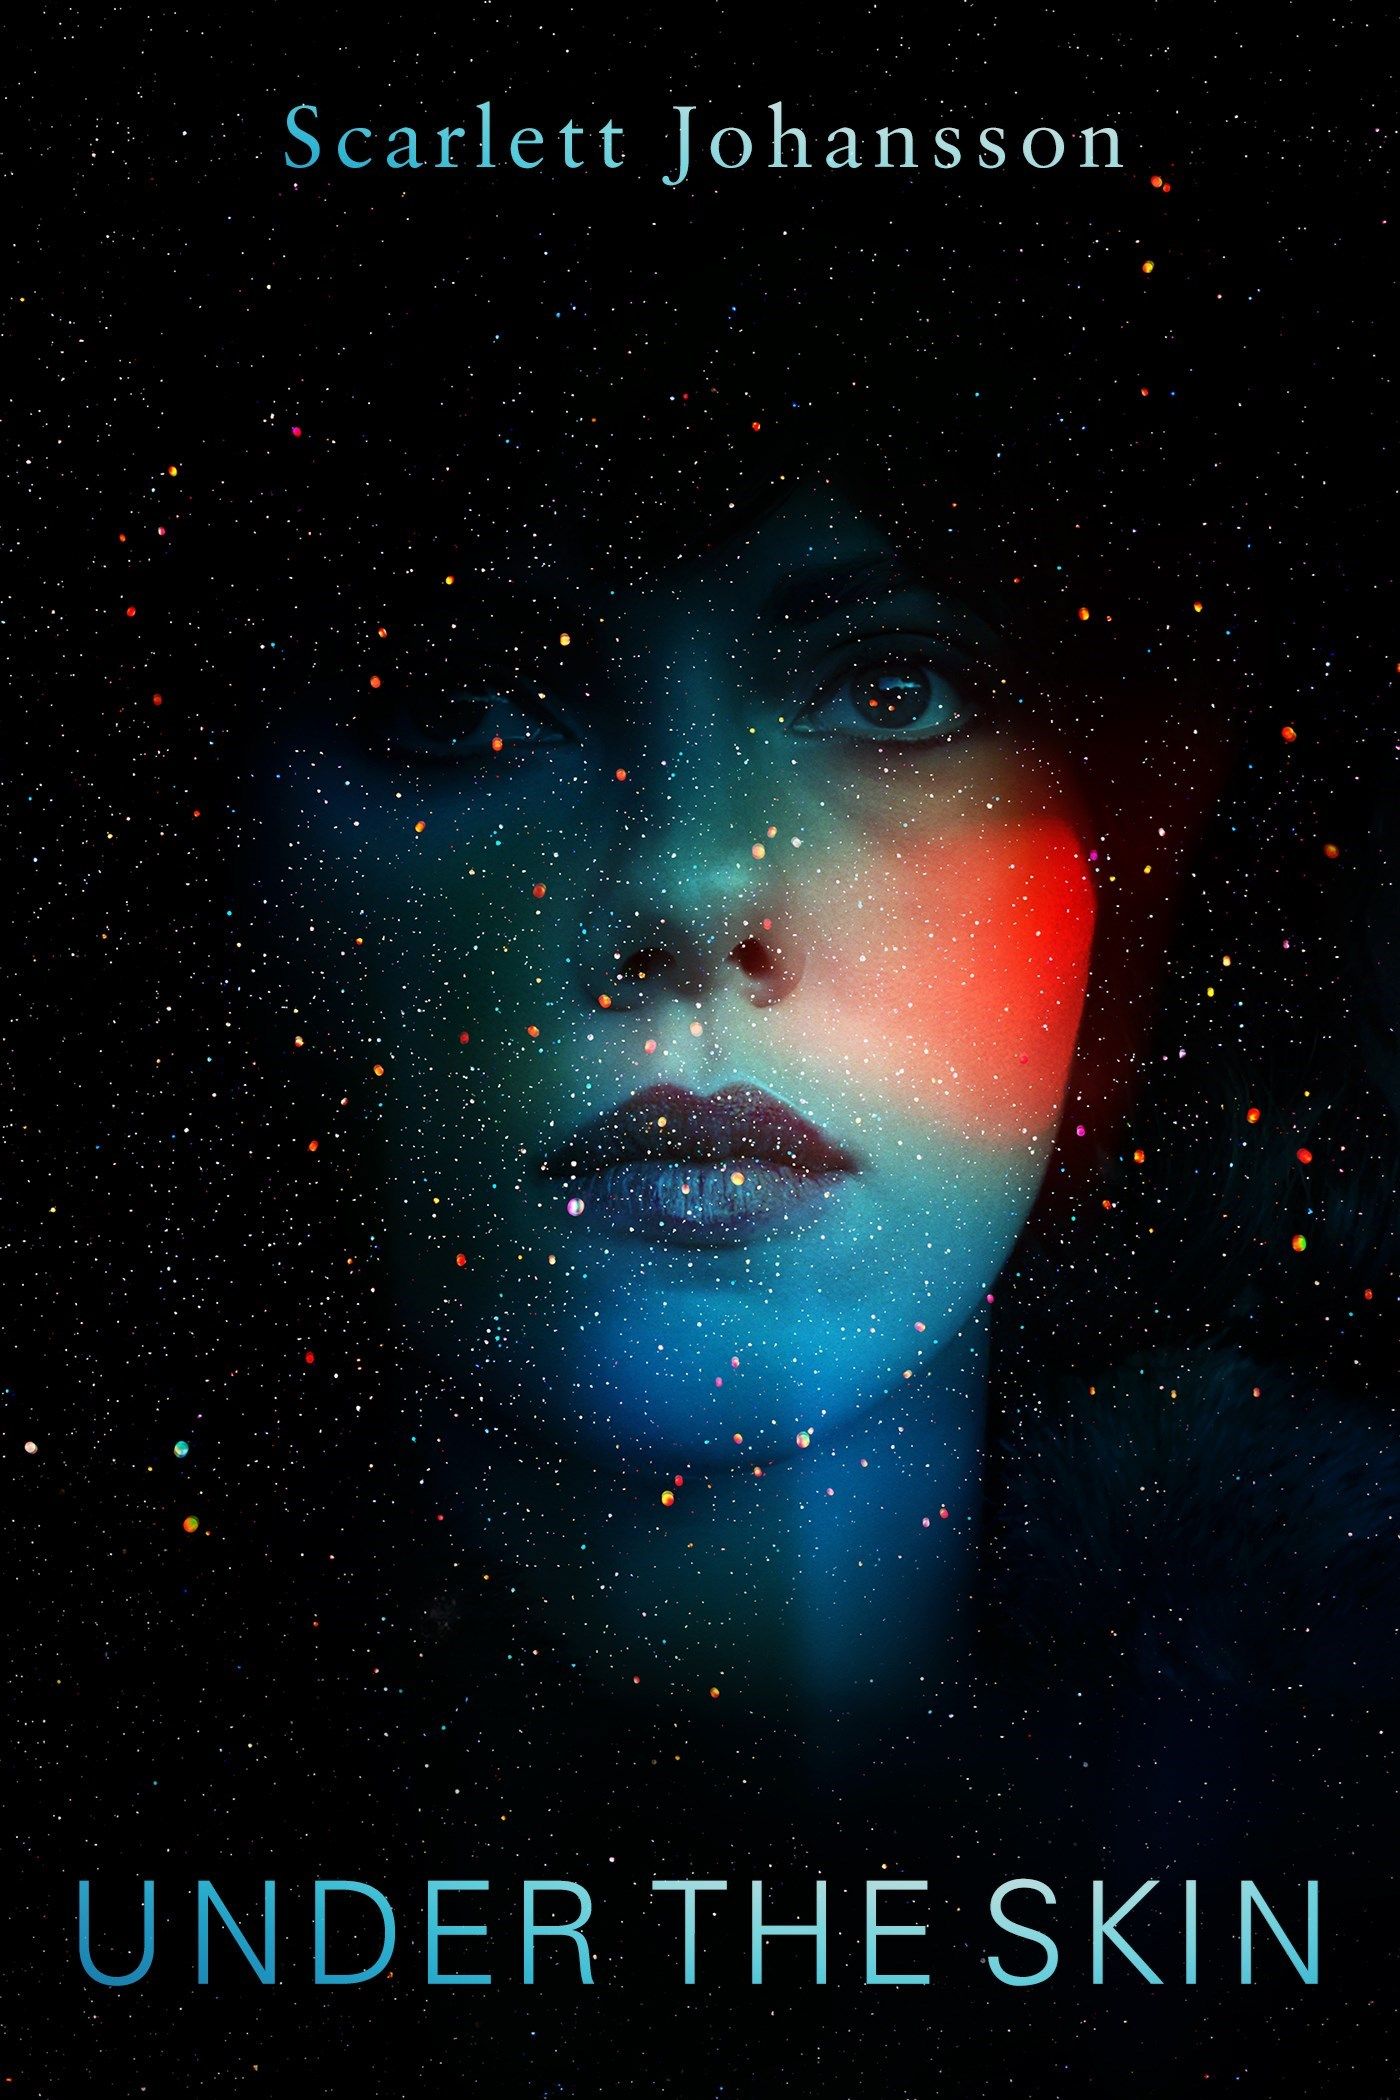 Under the Skin of a Mysterious Woman' is a book about a mysterious woman